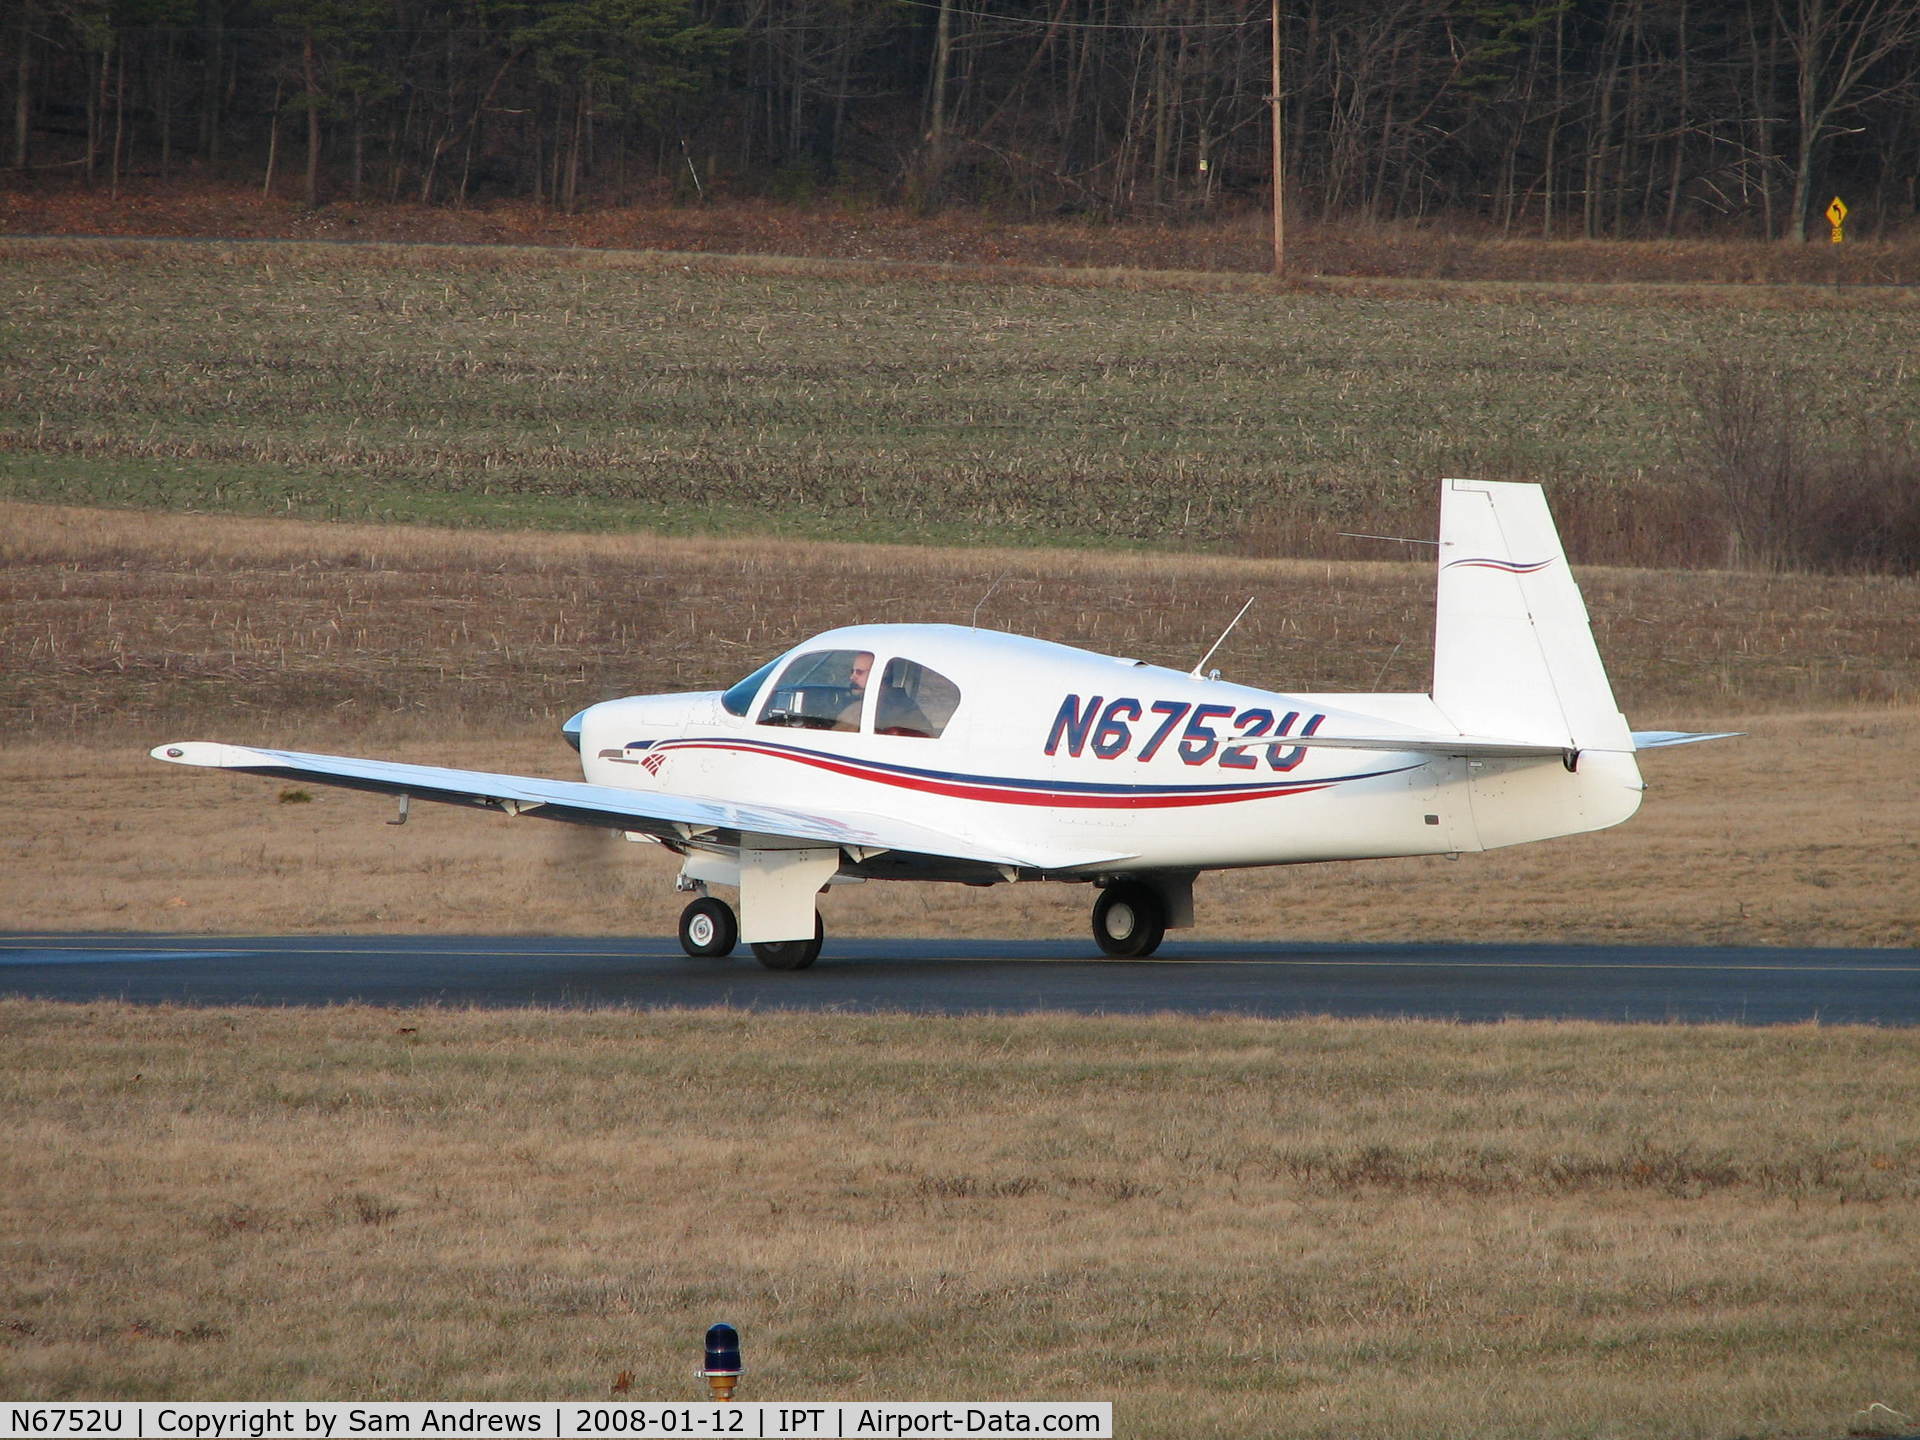 N6752U, 1963 Mooney M20C Ranger C/N 2474, Waiting for the guy that just landed to get clear of the runway.